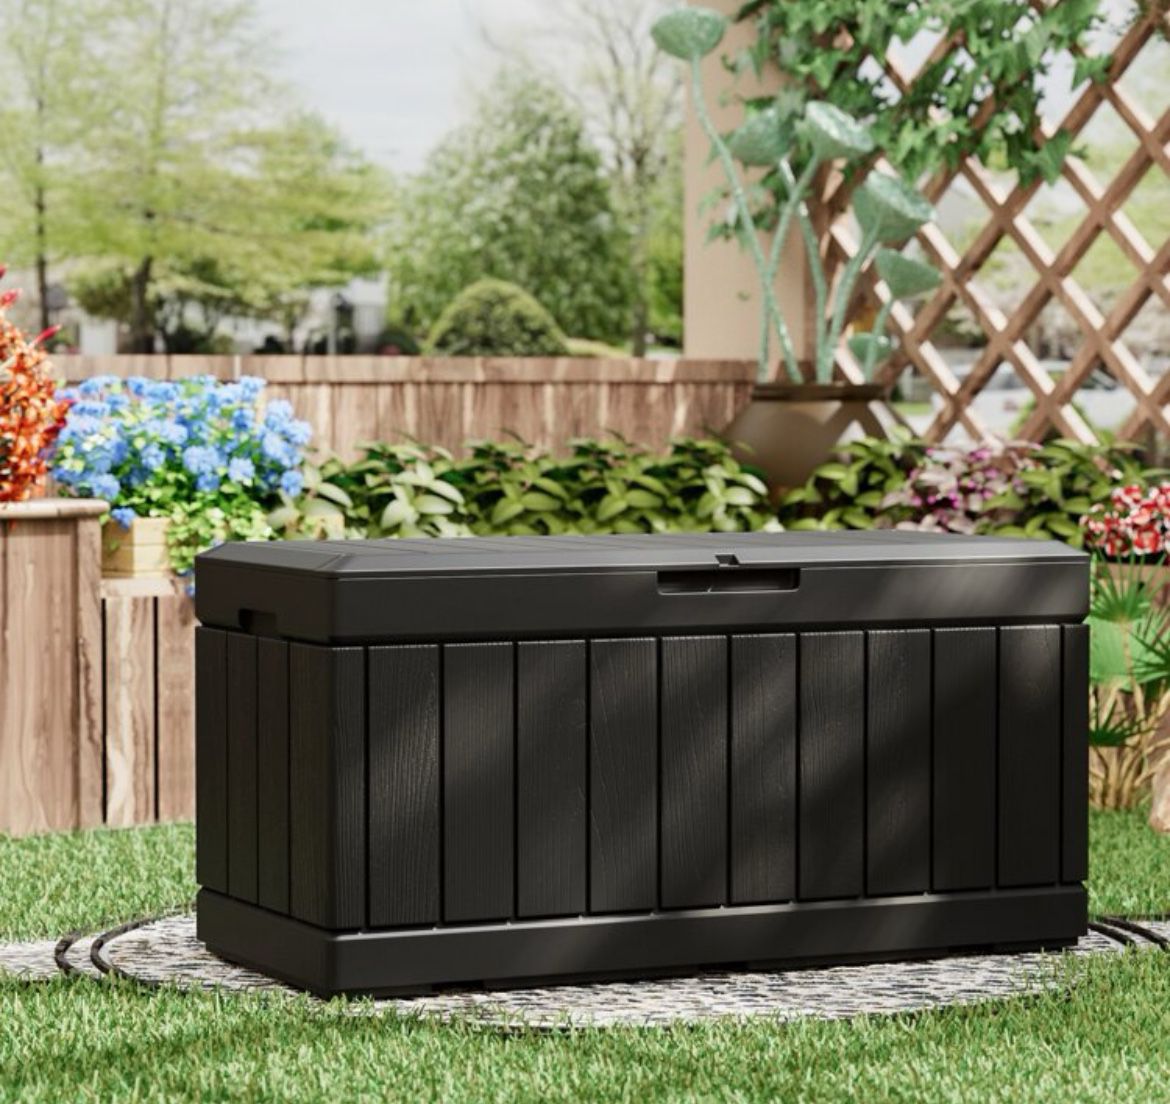 90 Gallon Deck Box Lockable Resin Outdoor Storage Box waterproof Outdoor Container for Patio Furniture Cushions, Pillow and Pool Toys